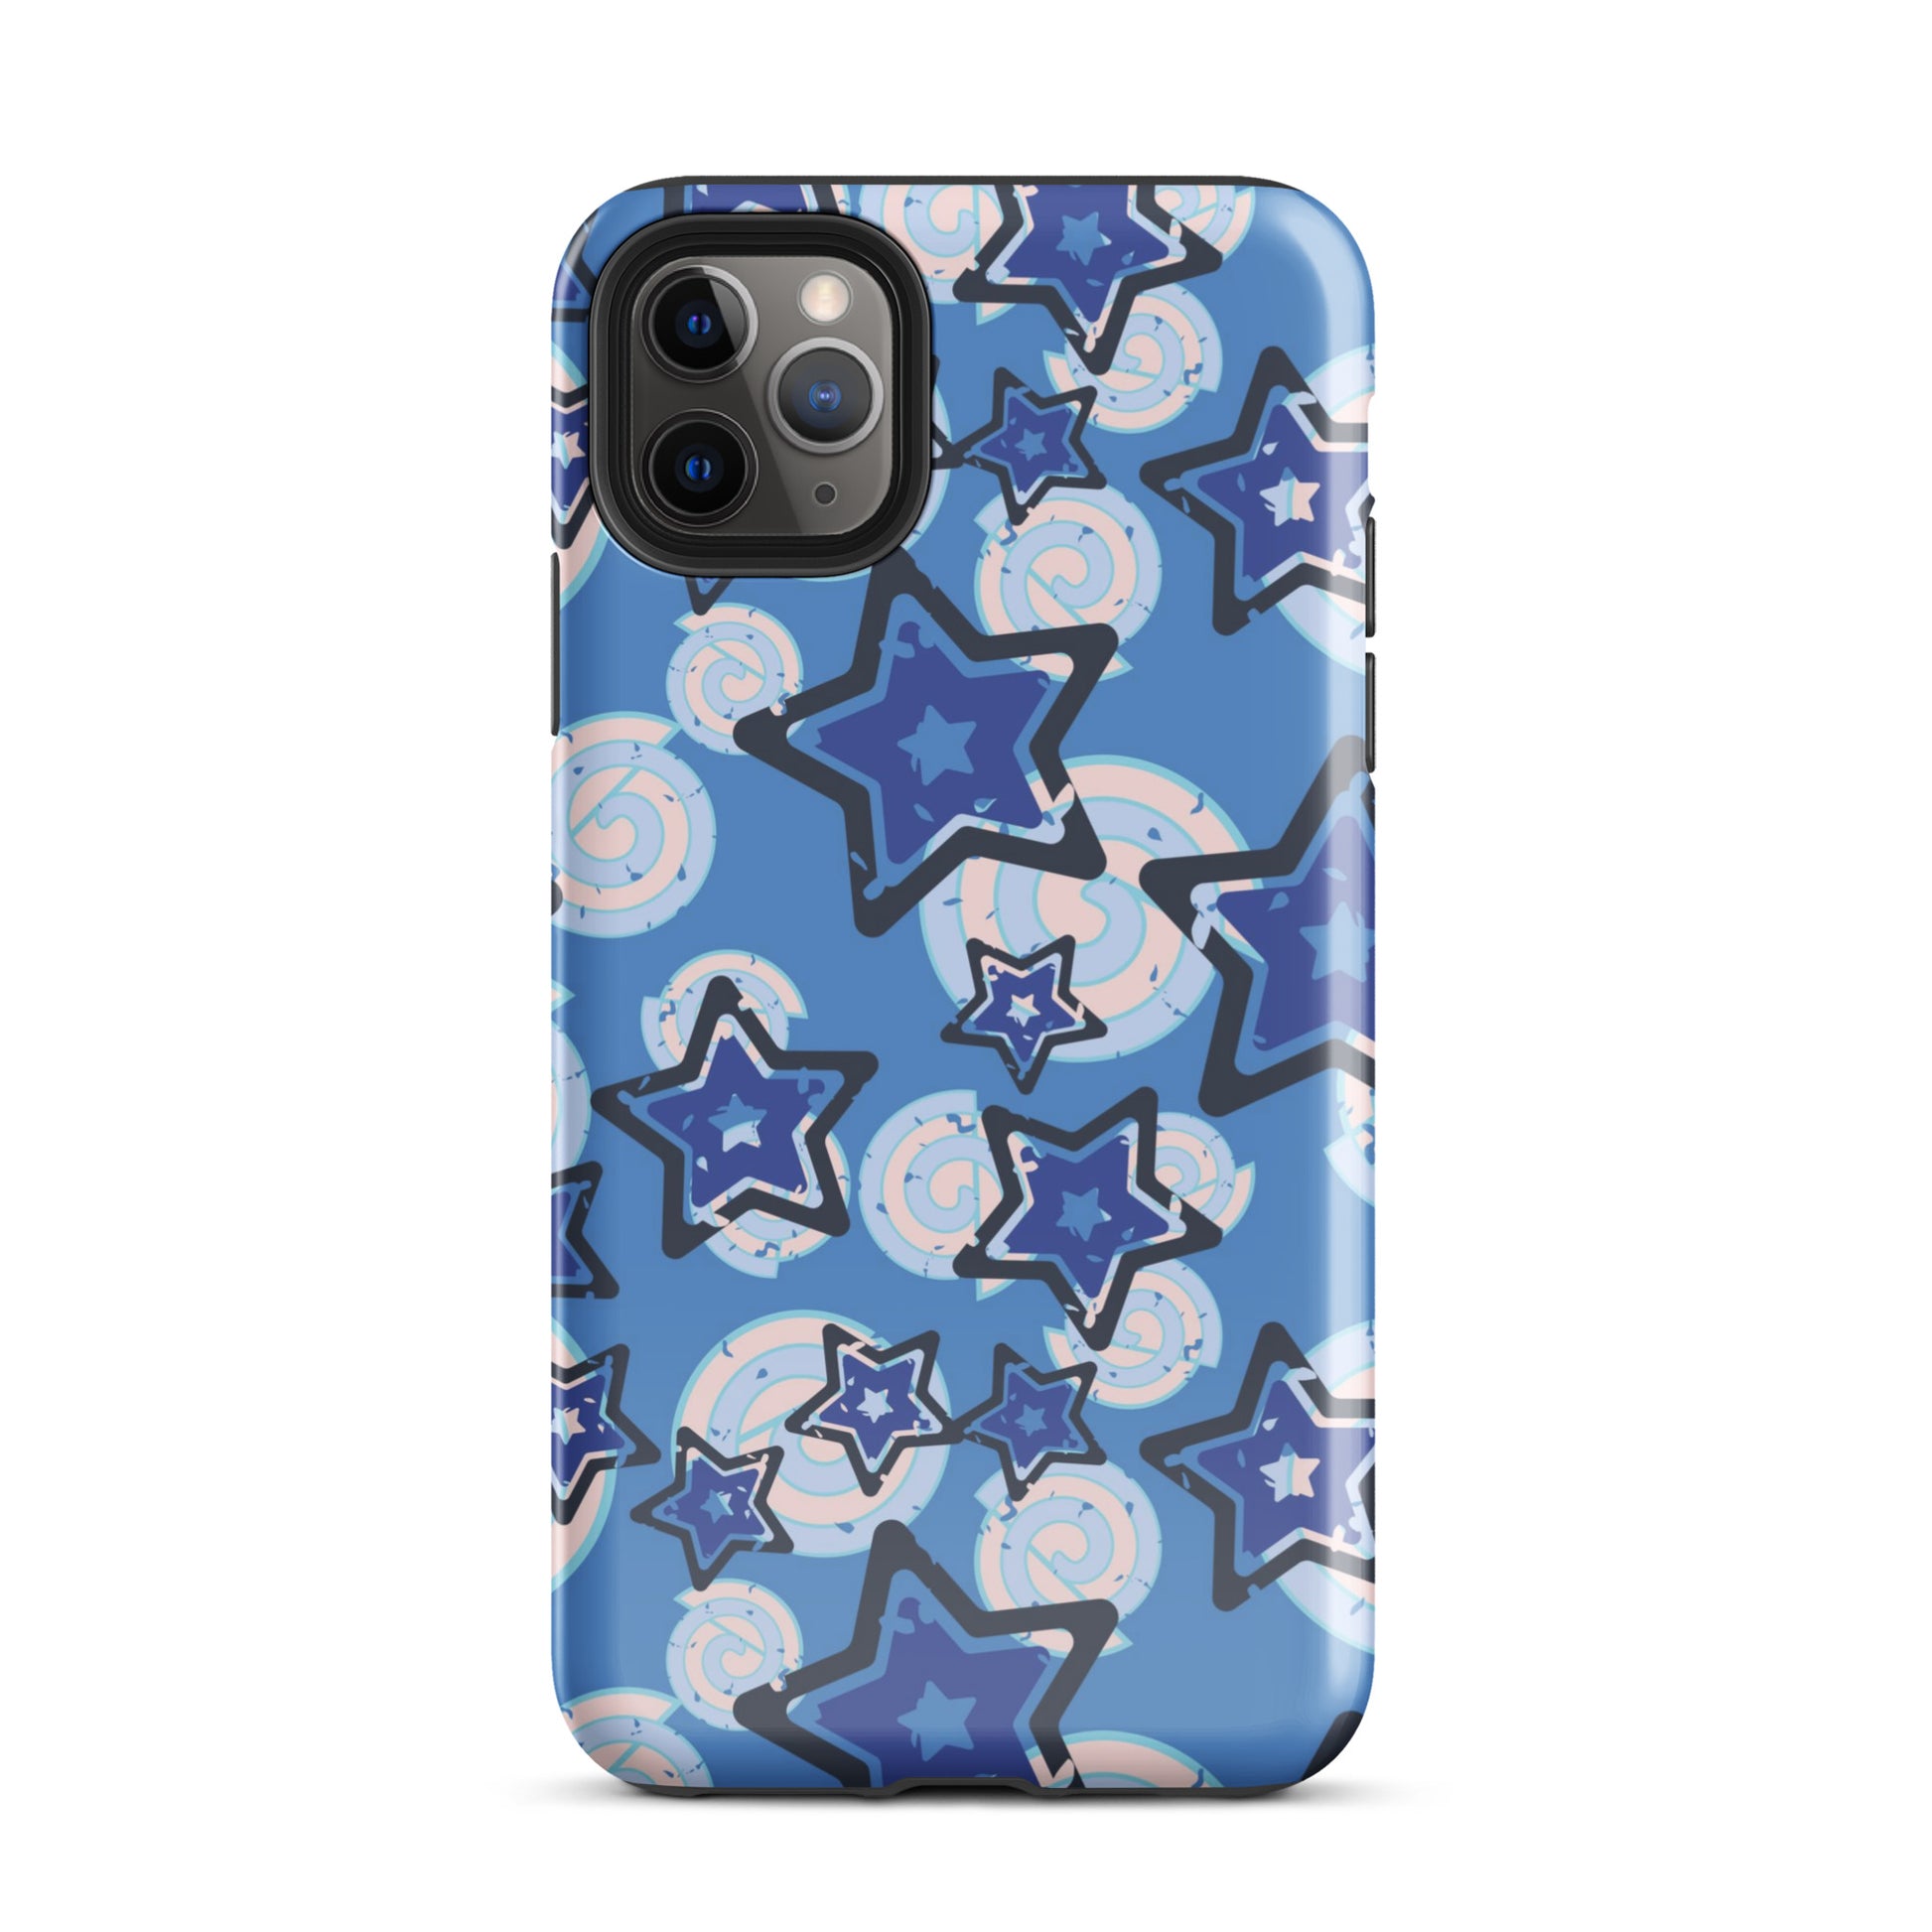 Y2K Blue Star iPhone Case iPhone 11 Pro Max Glossy